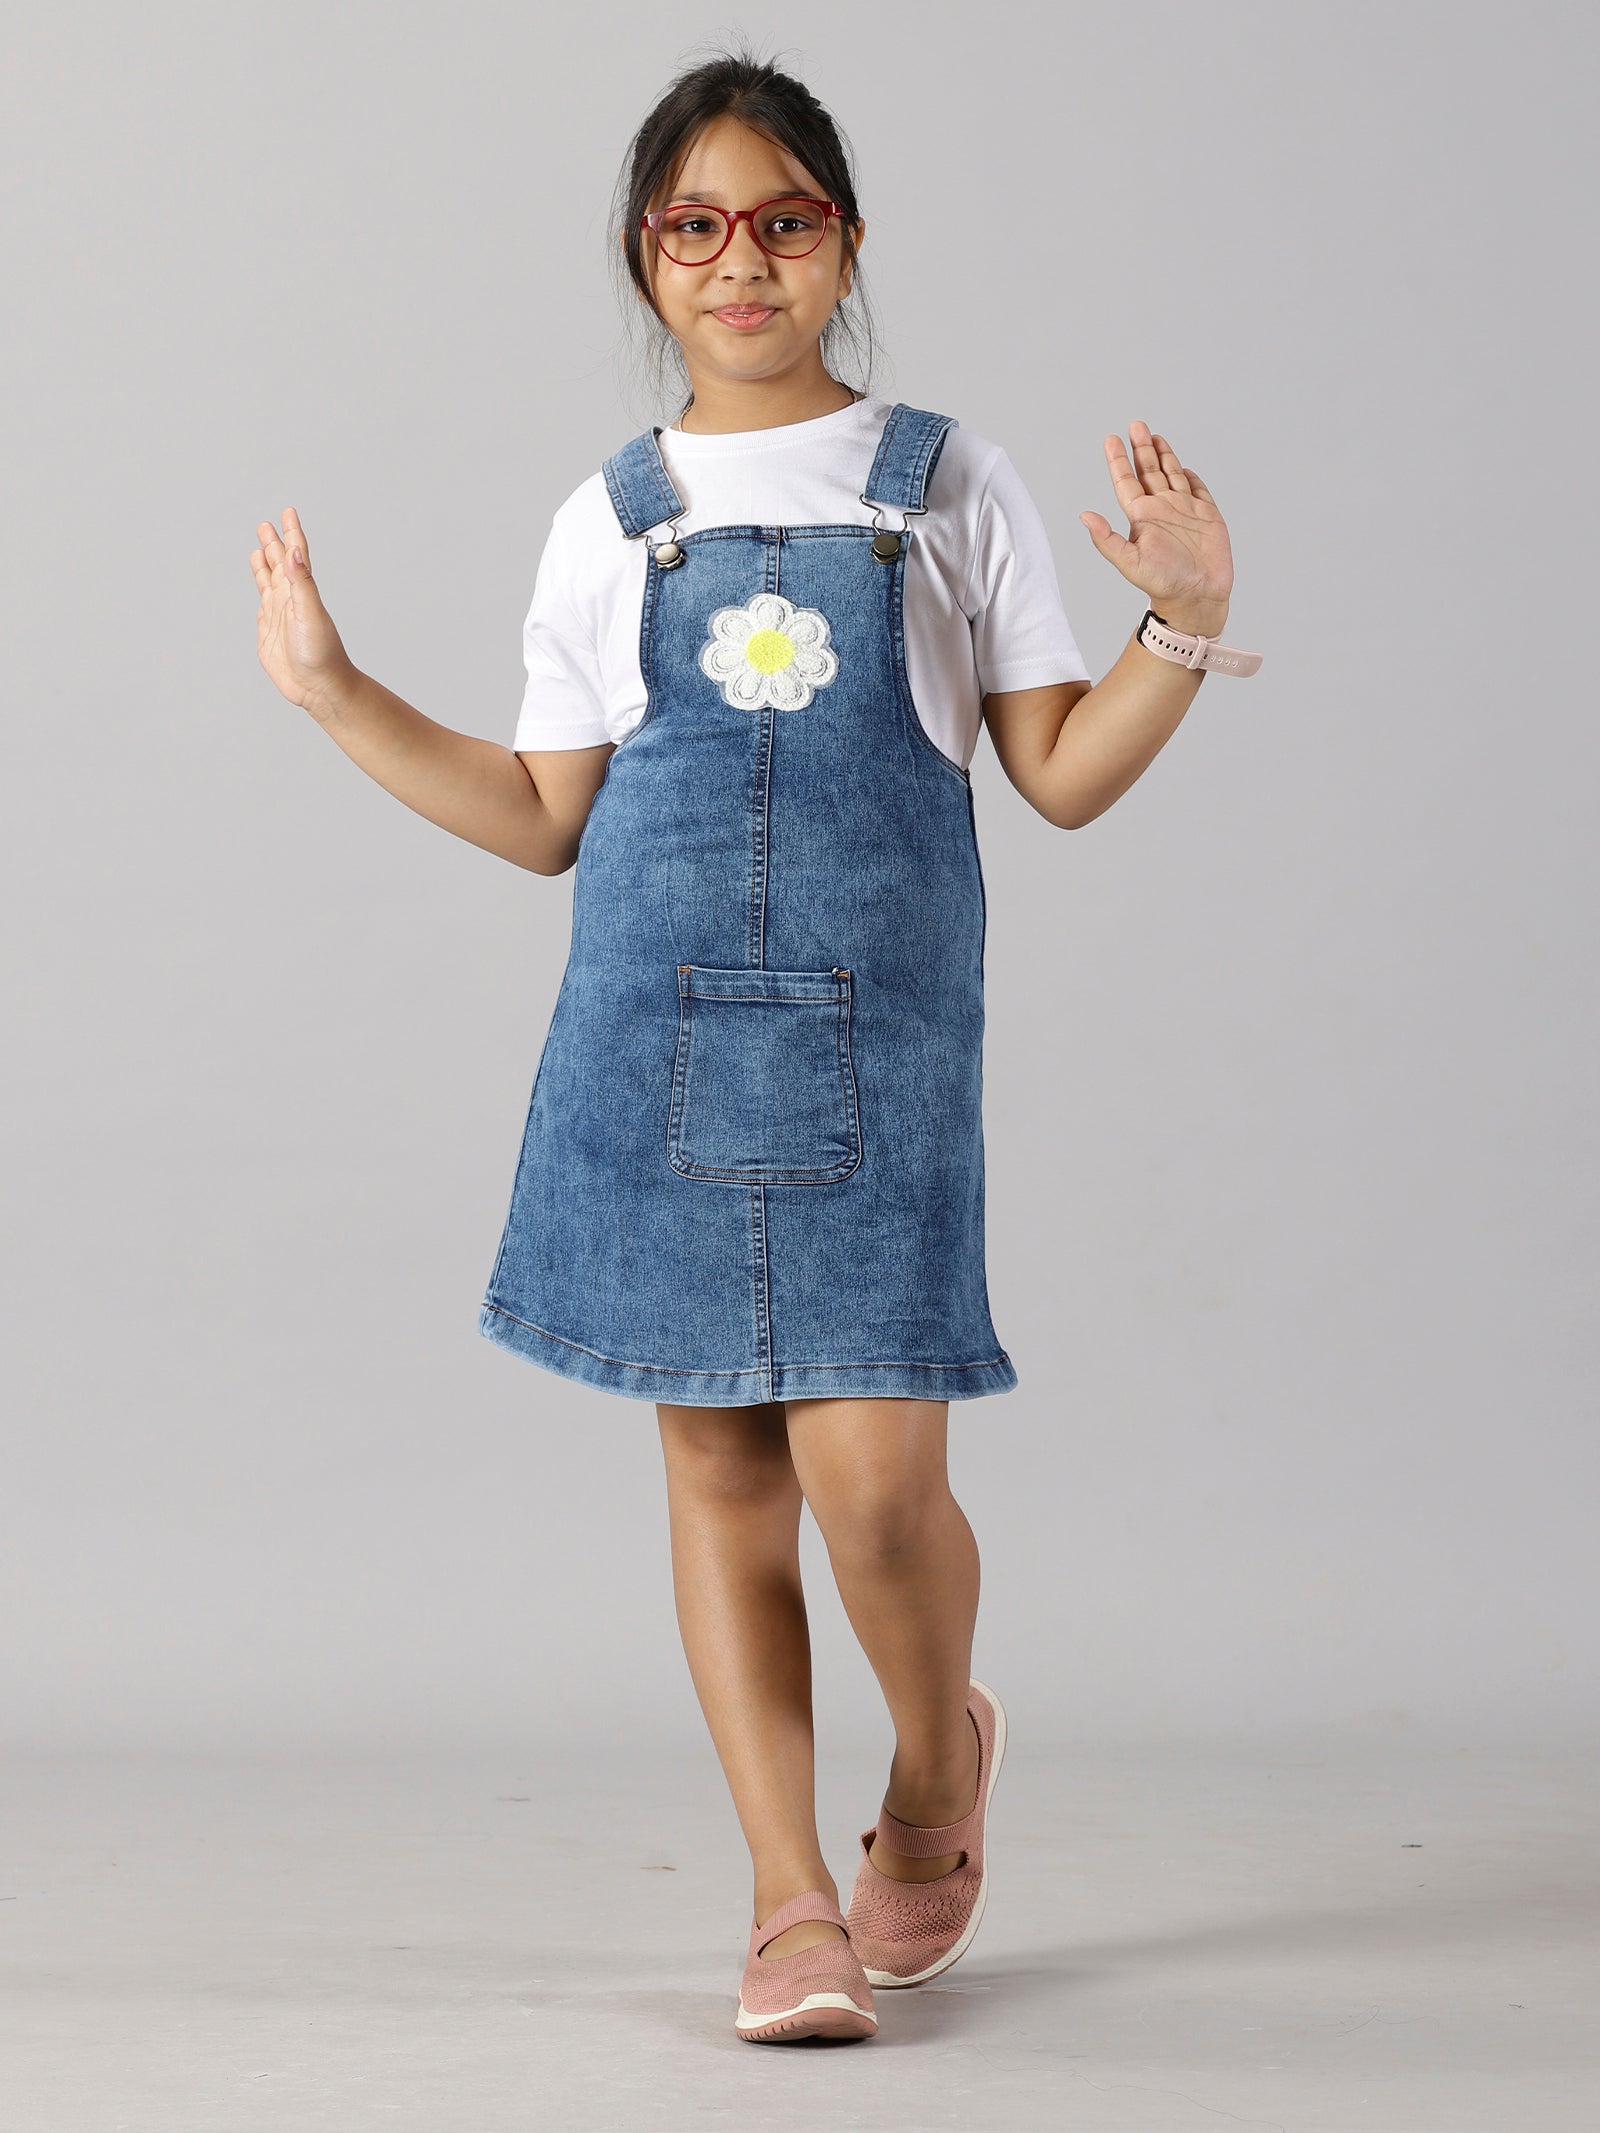 DIY Dungaree Dress From Old Corduroy Pants – Fashion Wanderer